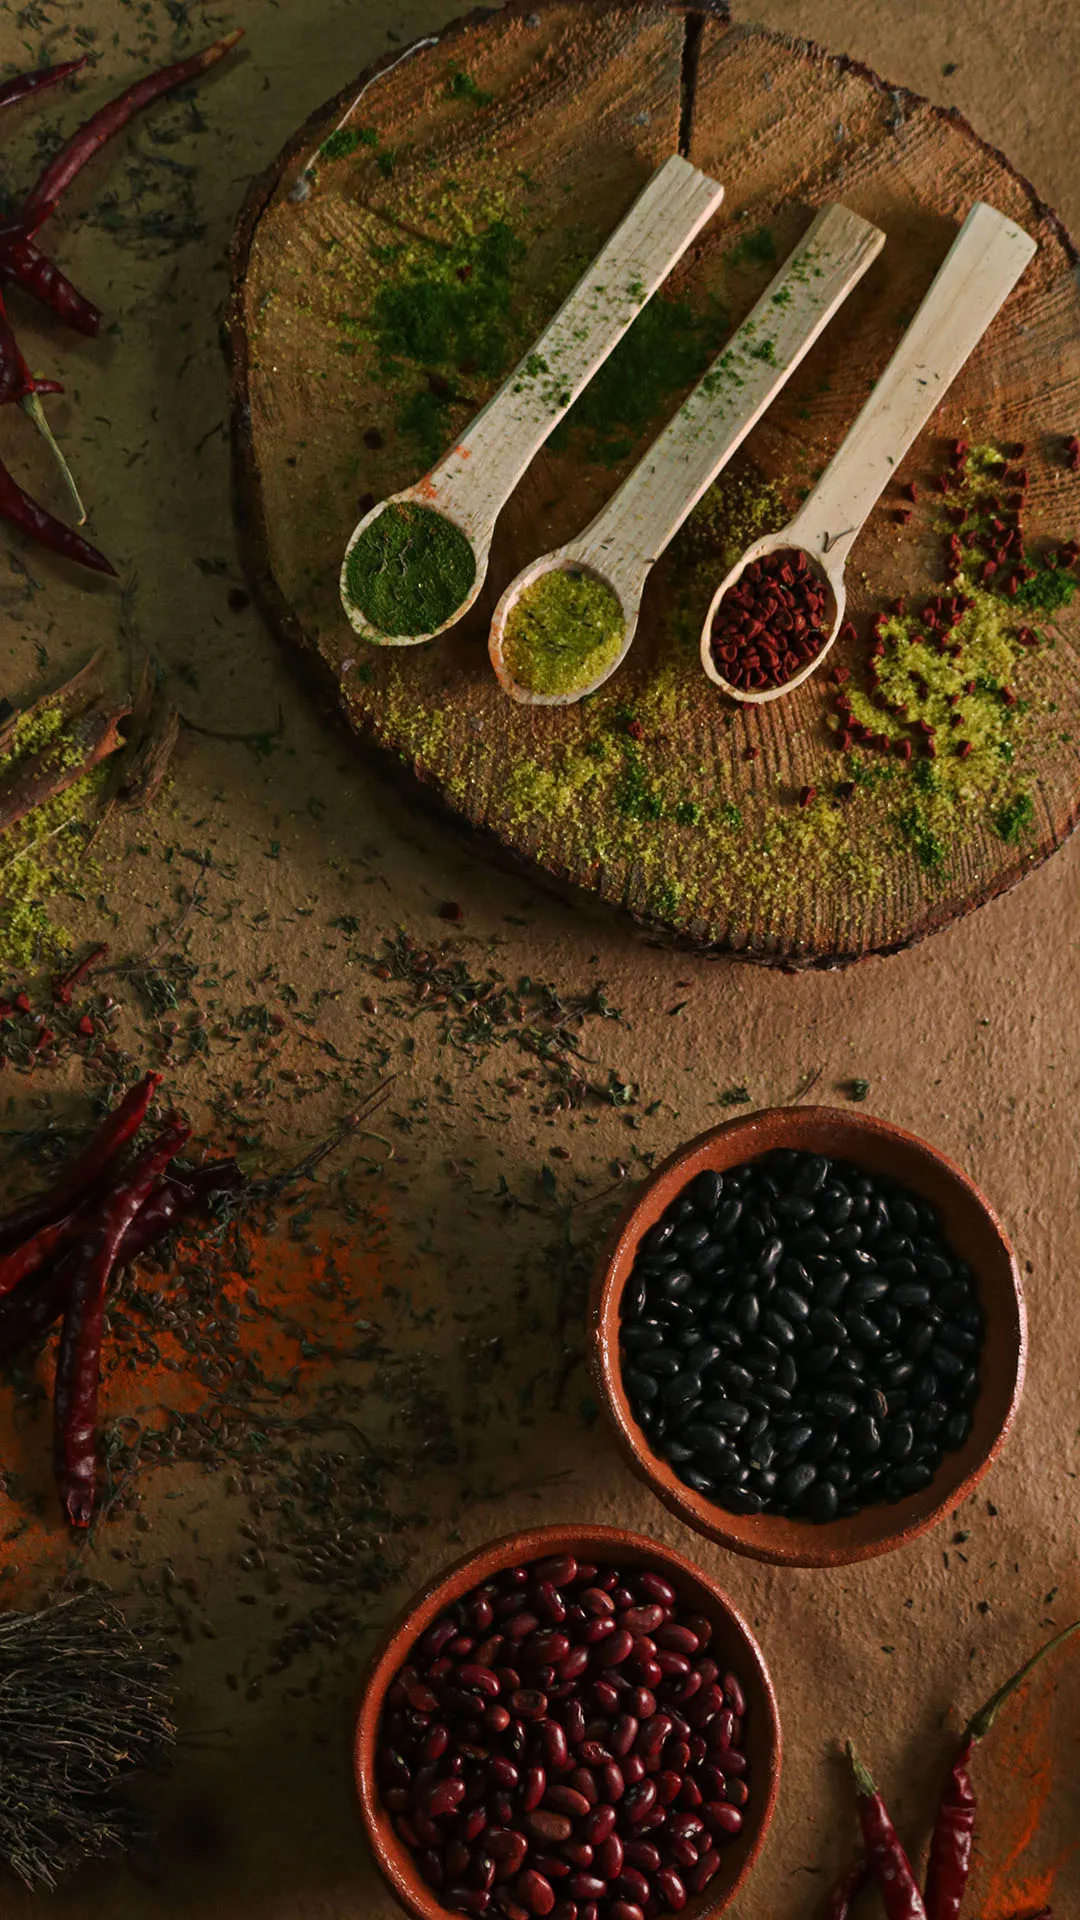 Photography of Wooden Spoons Filled with Spices